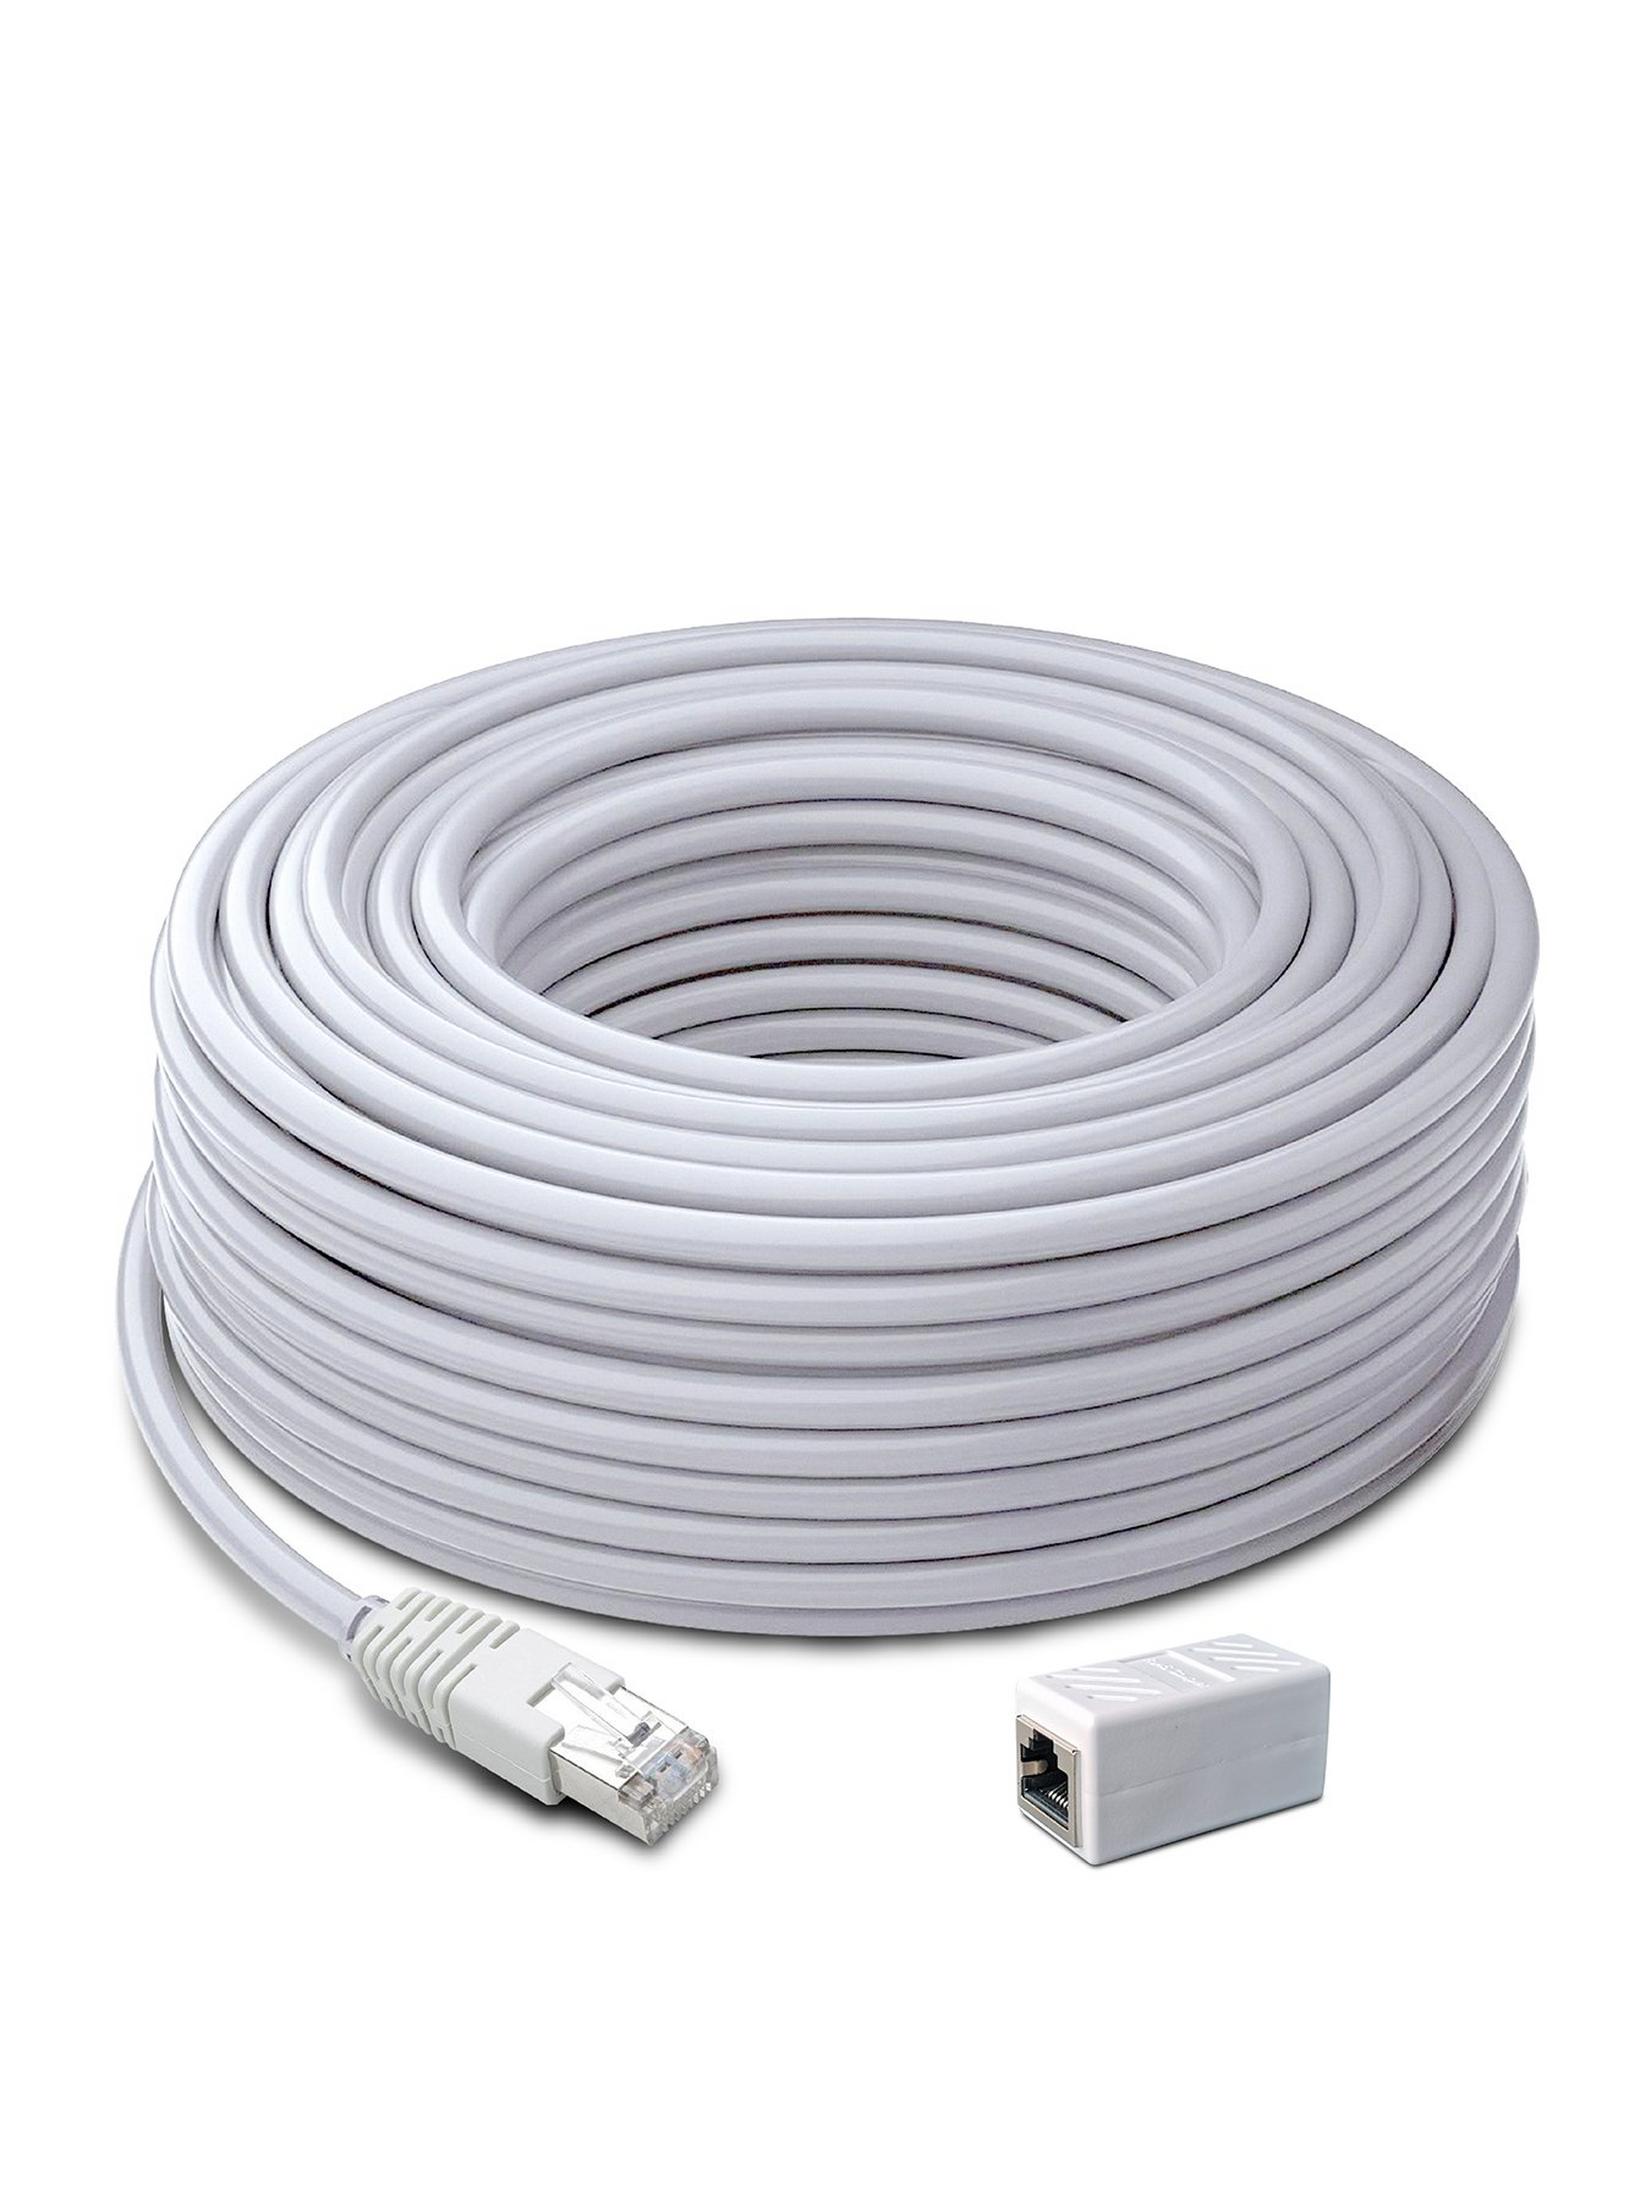 Swann100ft/30m Network Extension Cable £50 post thumbnail image